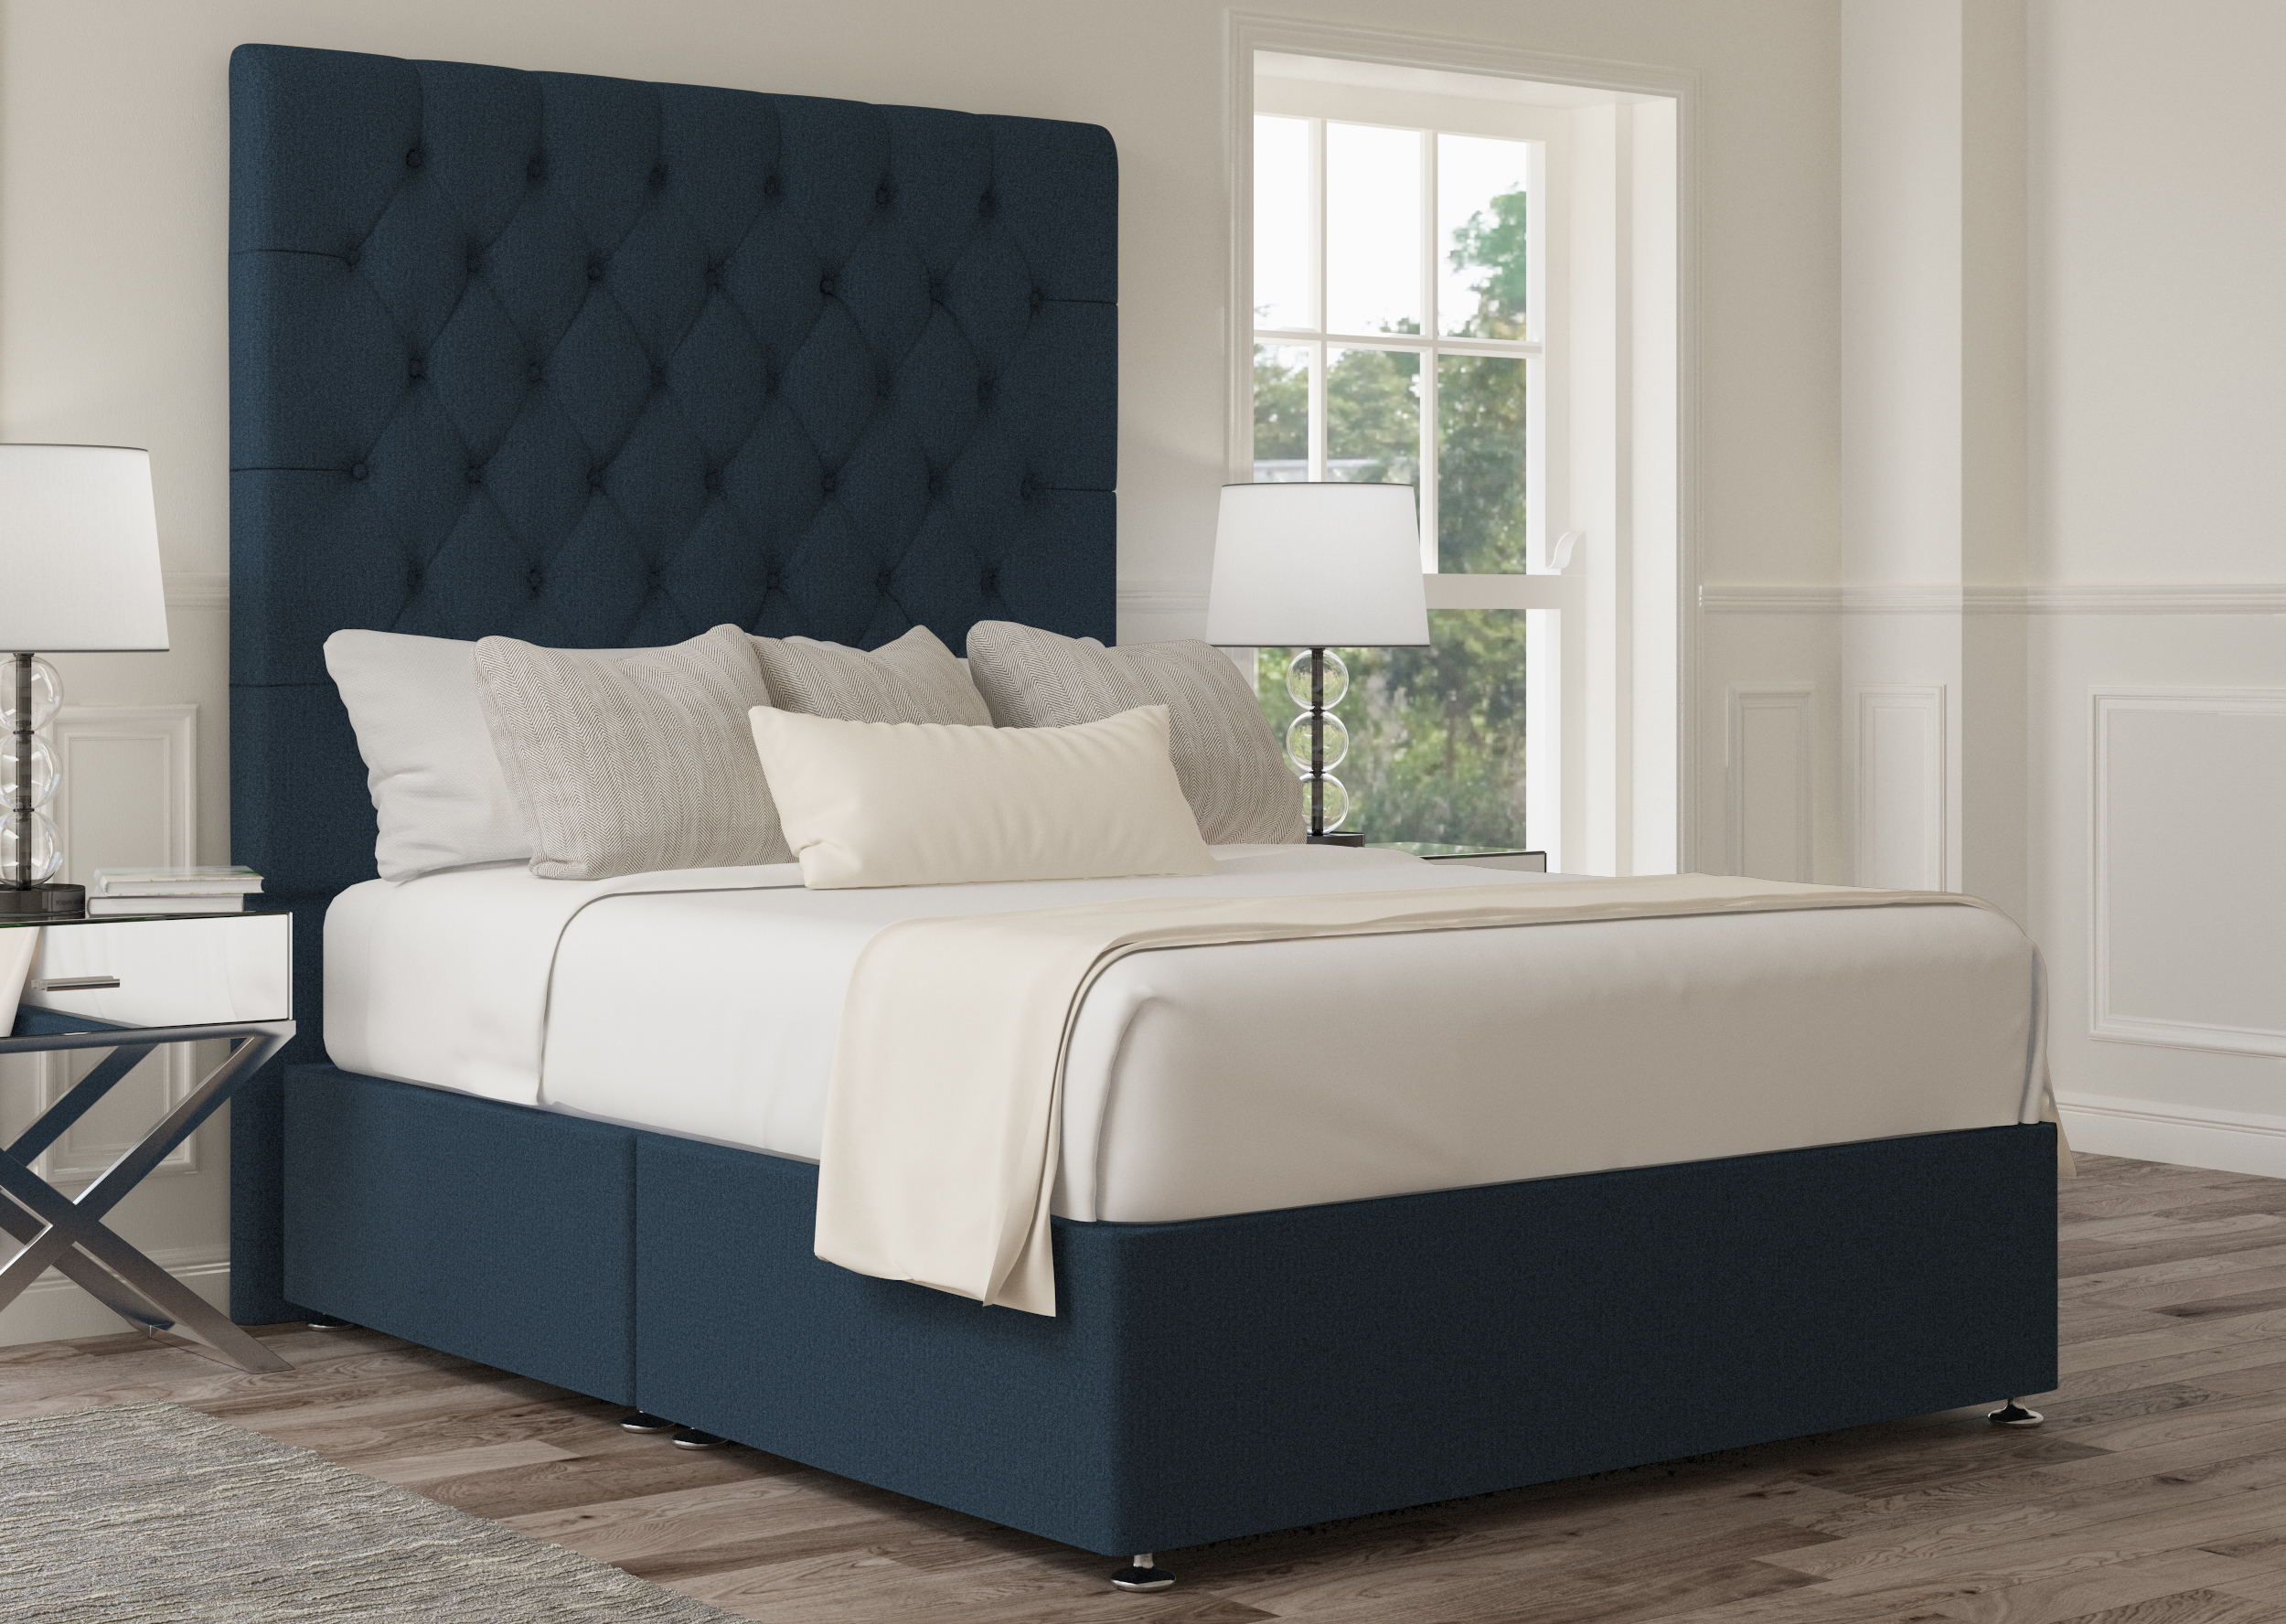 View Sephora Arran Pebble Upholstered King Size Bed Time4Sleep information